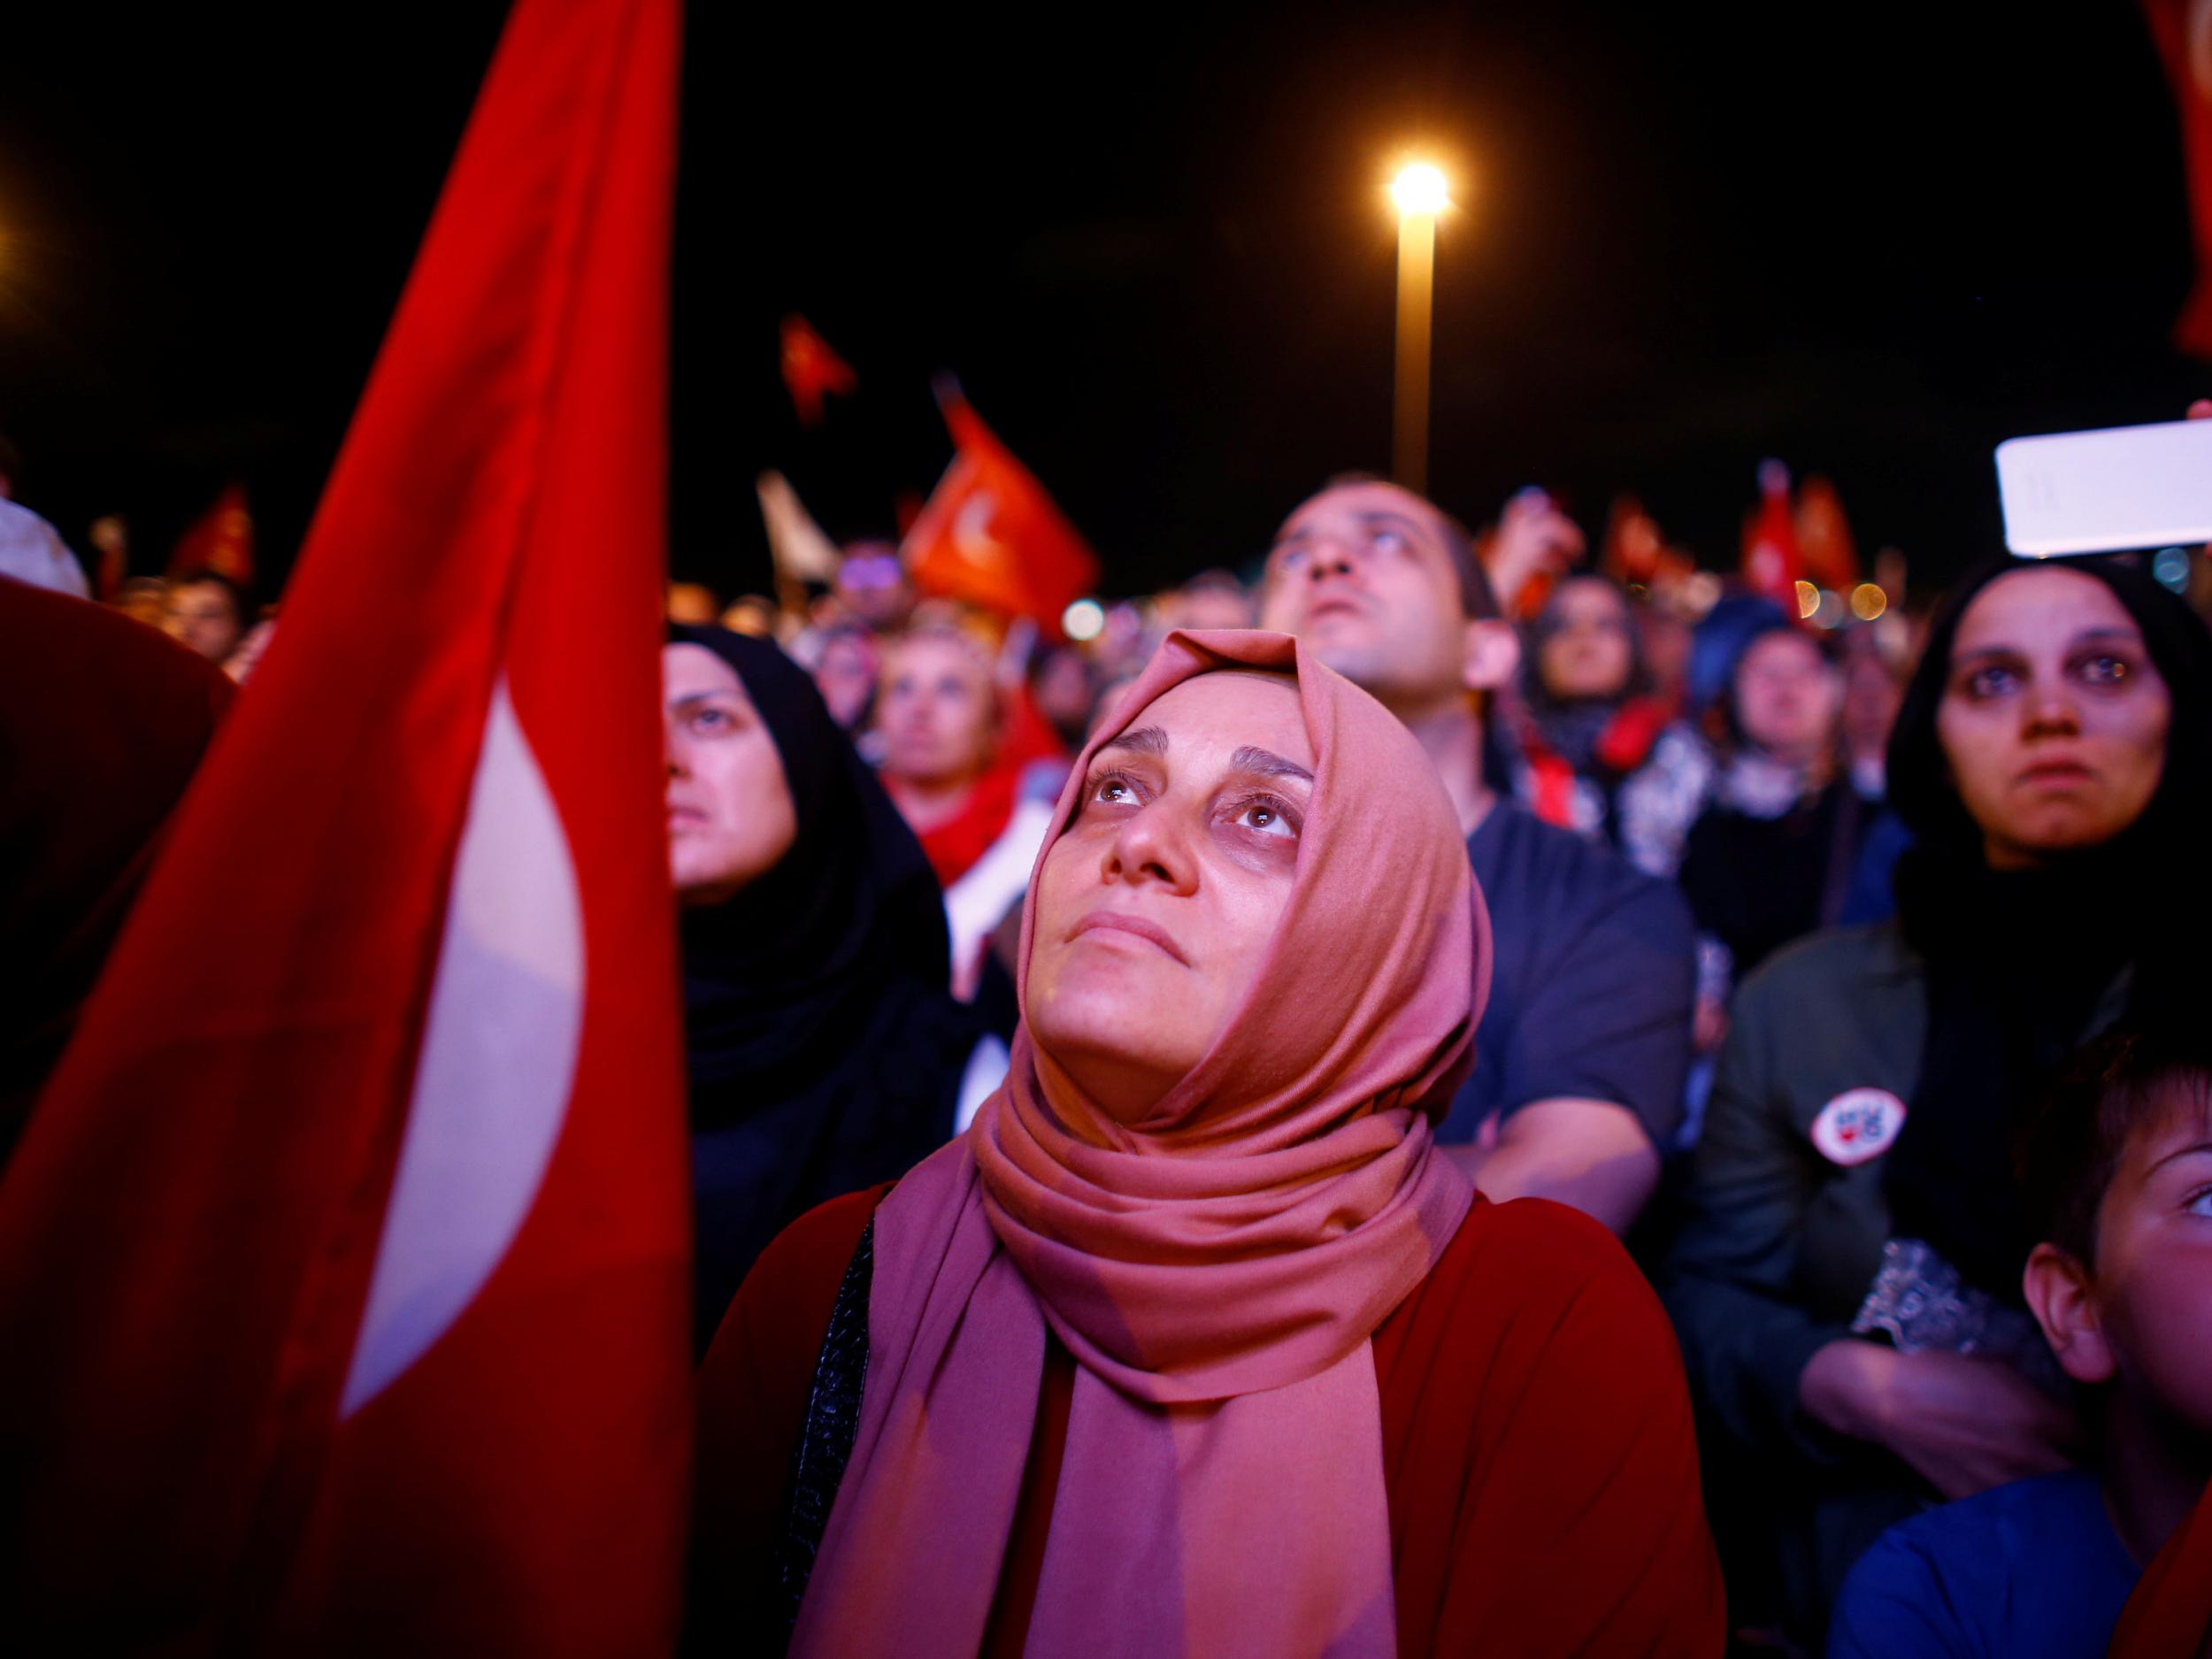 Onlookers at a rally on the anniversary of the failed coup